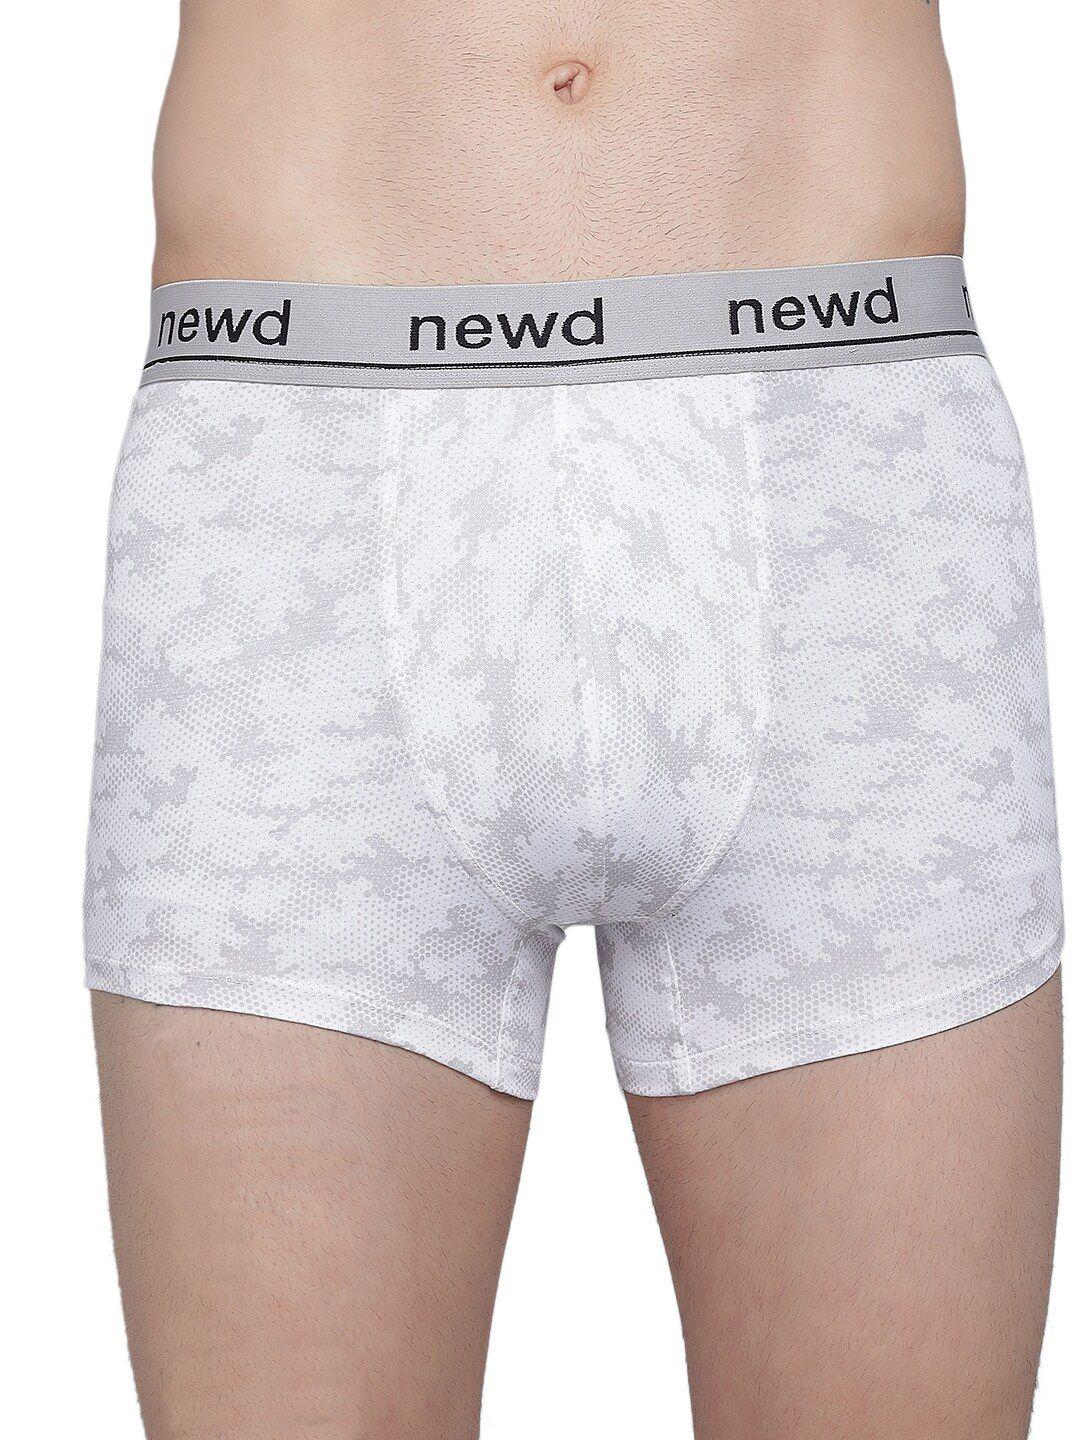 newd printed mid-rise trunks ntp6-white-s